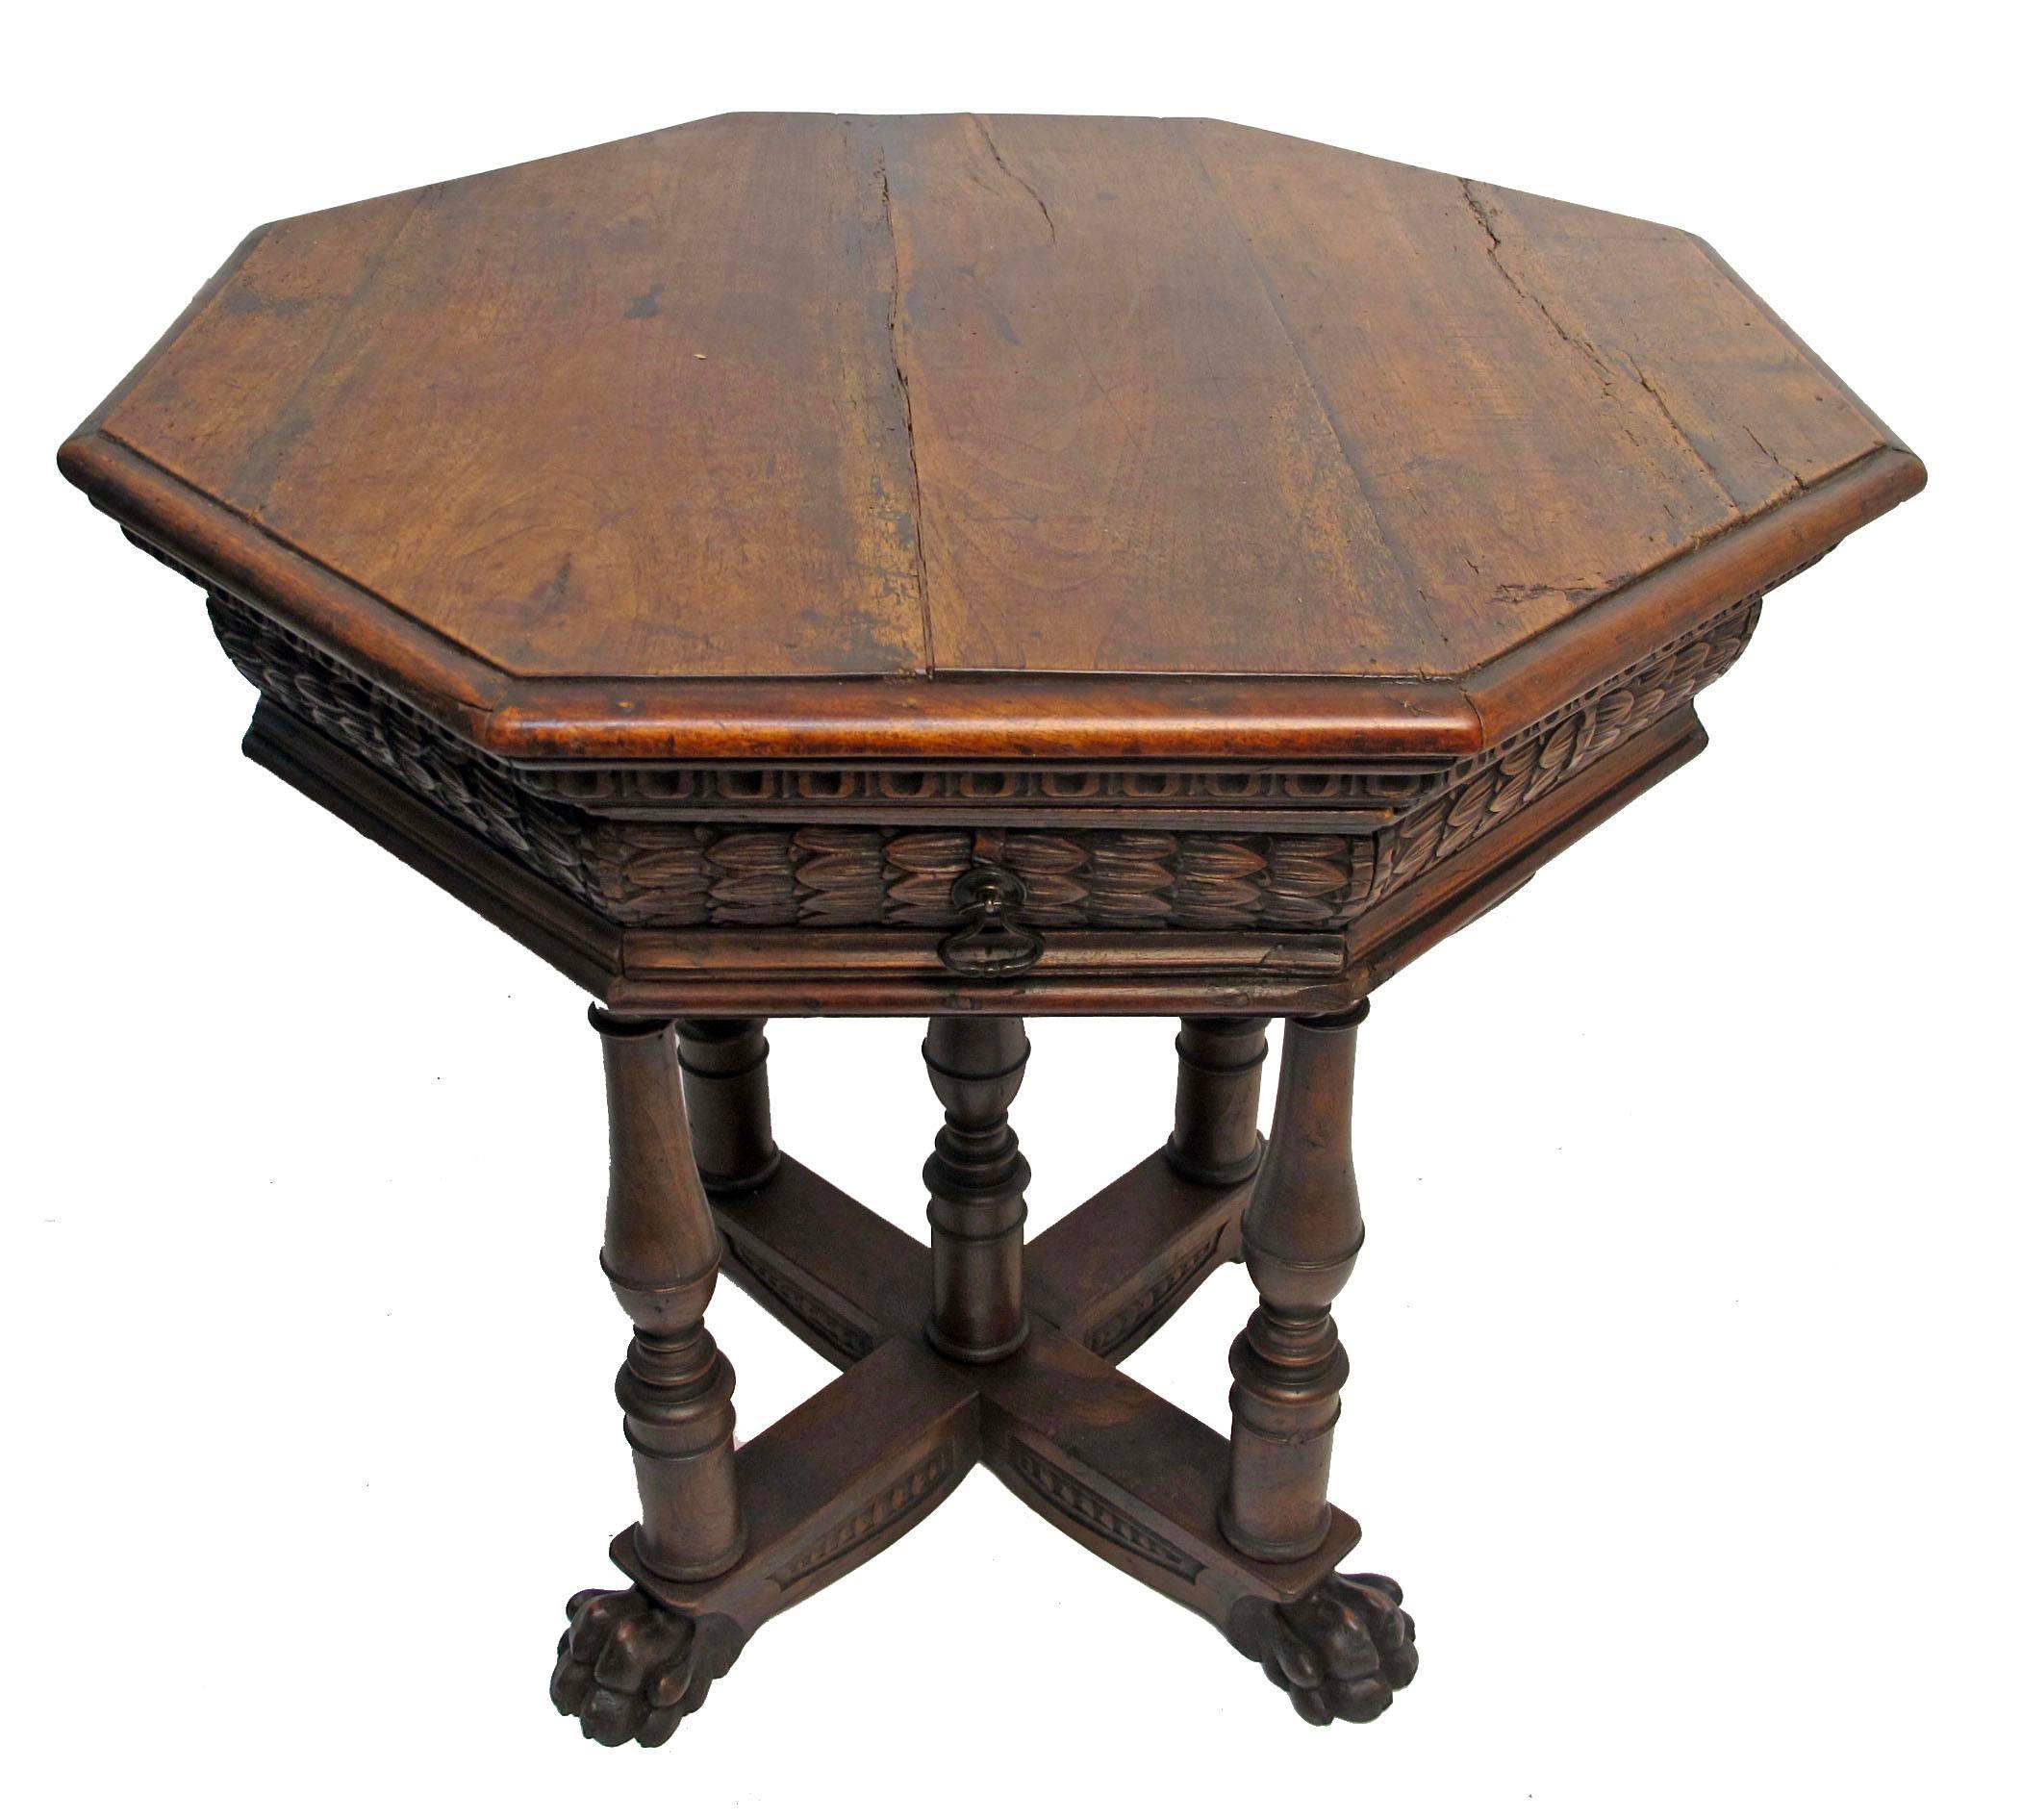 Renaissance style octagonal shape walnut centre table with a singled drawer in the elaborately carved apron, supported on four turned columns, ending on carved paw feet. Italy, circa 1850.